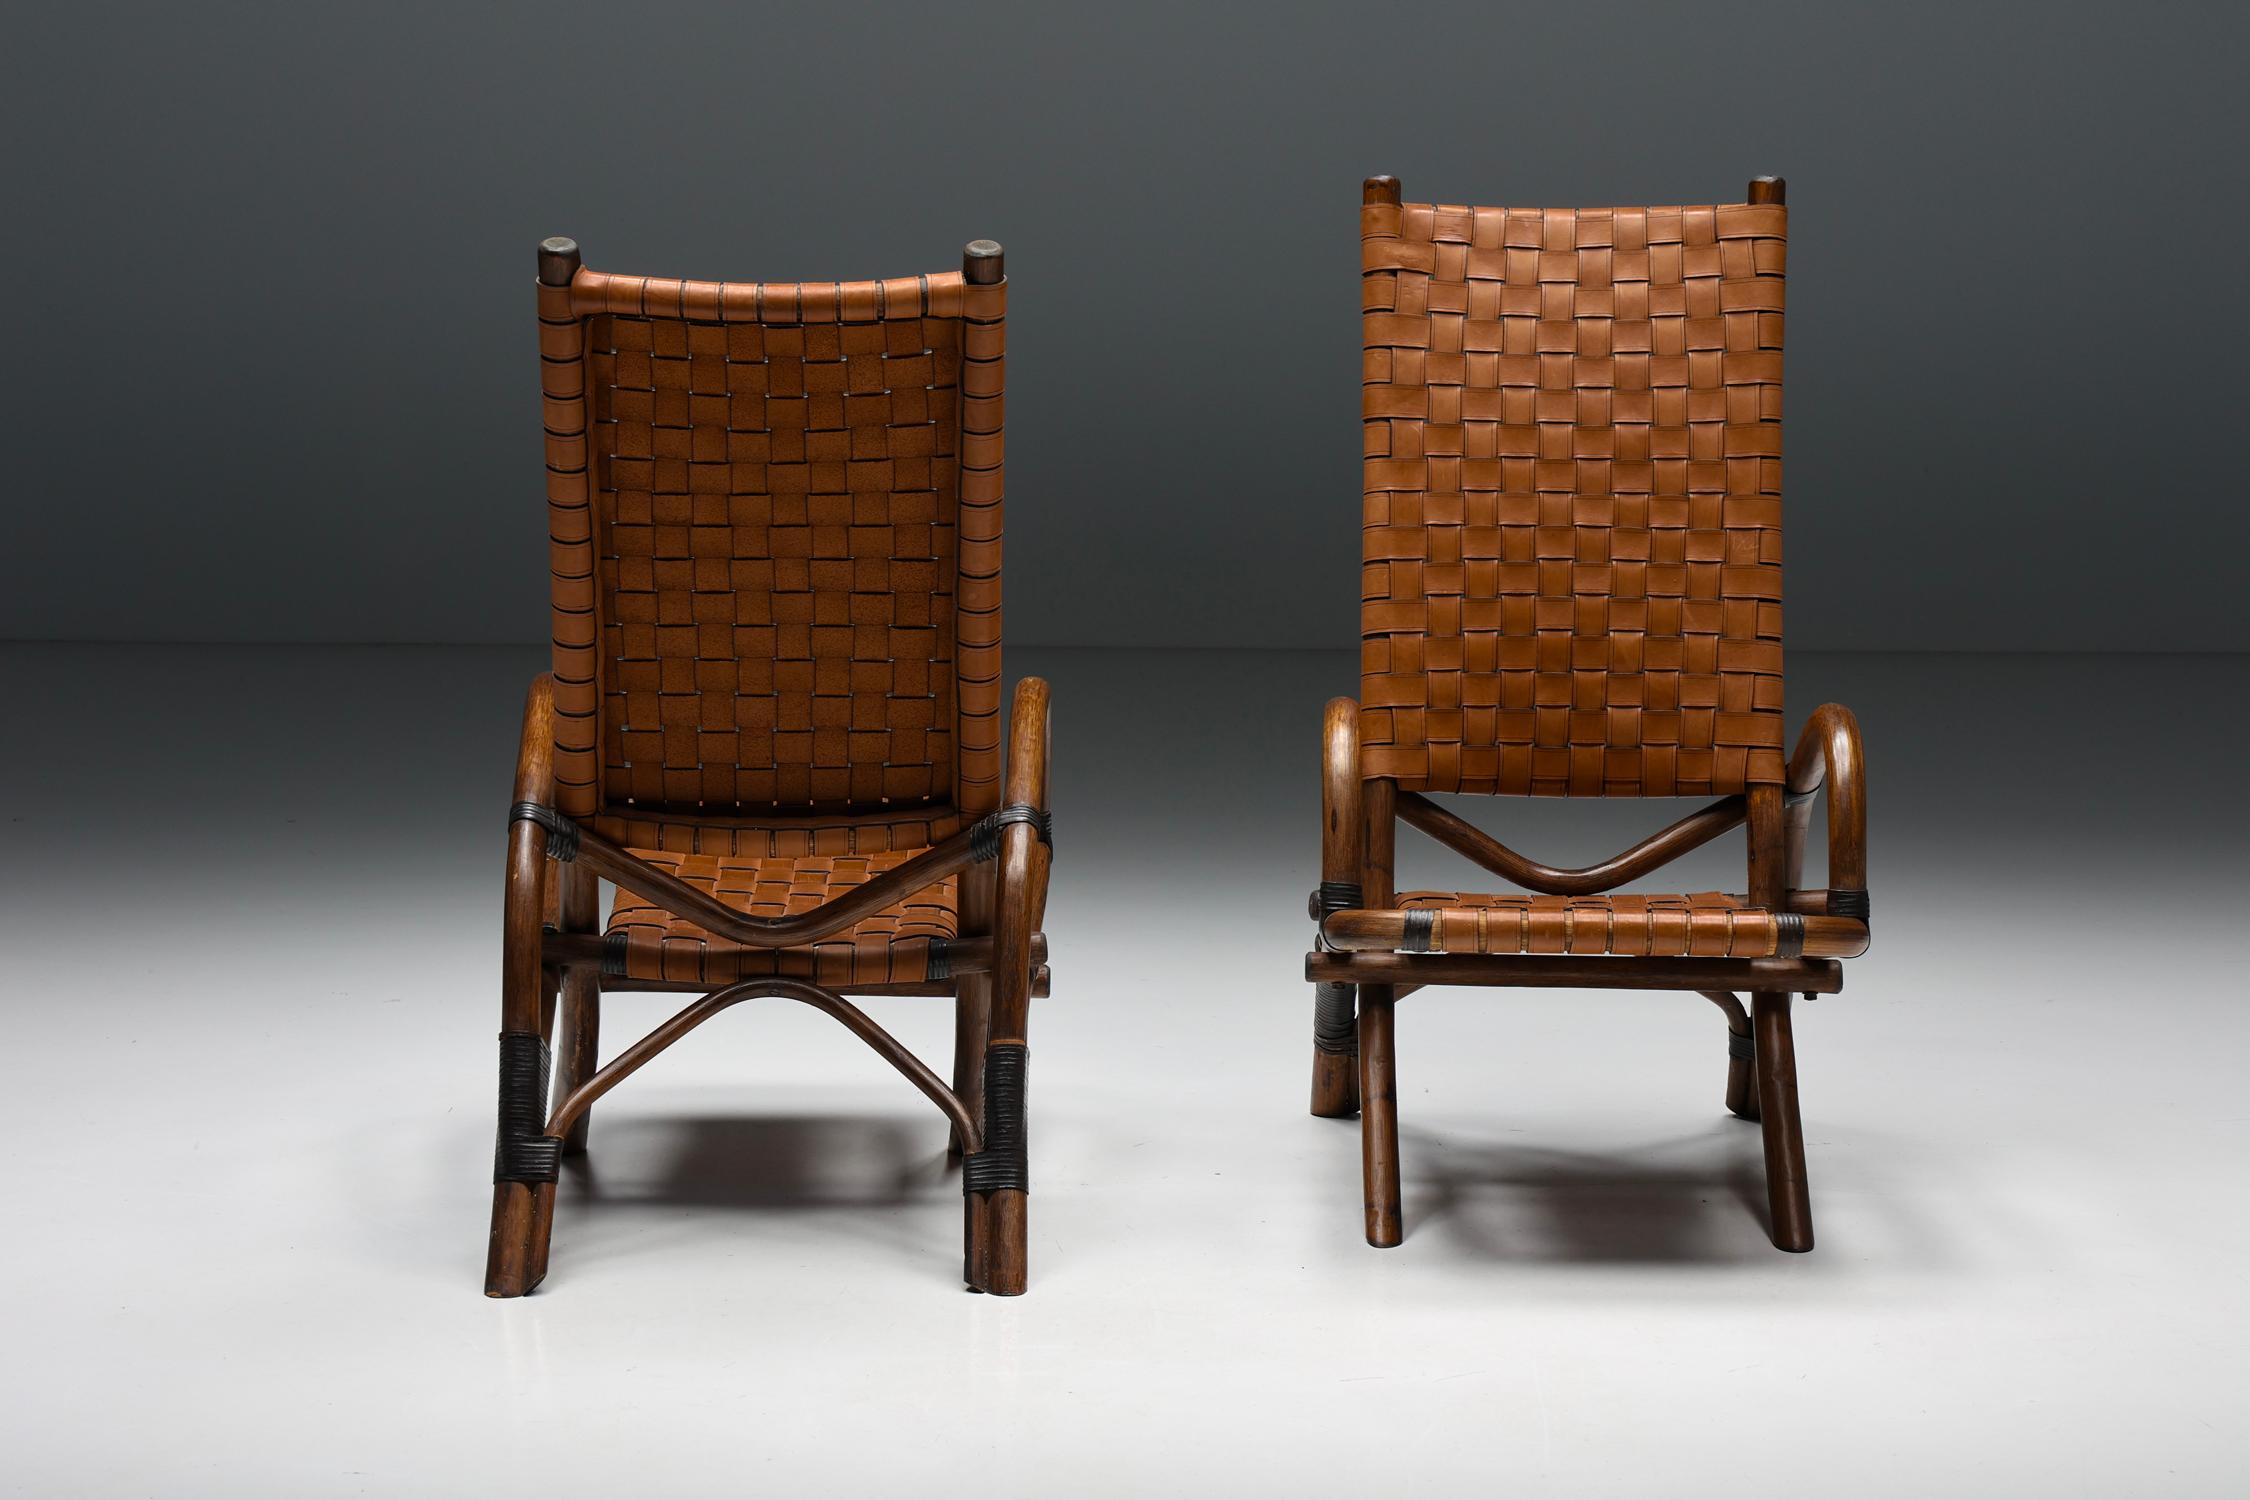 Pair of Rustic Woven Leather Bamboo Armchairs, Mid-Century Modern, France, 1950s 1